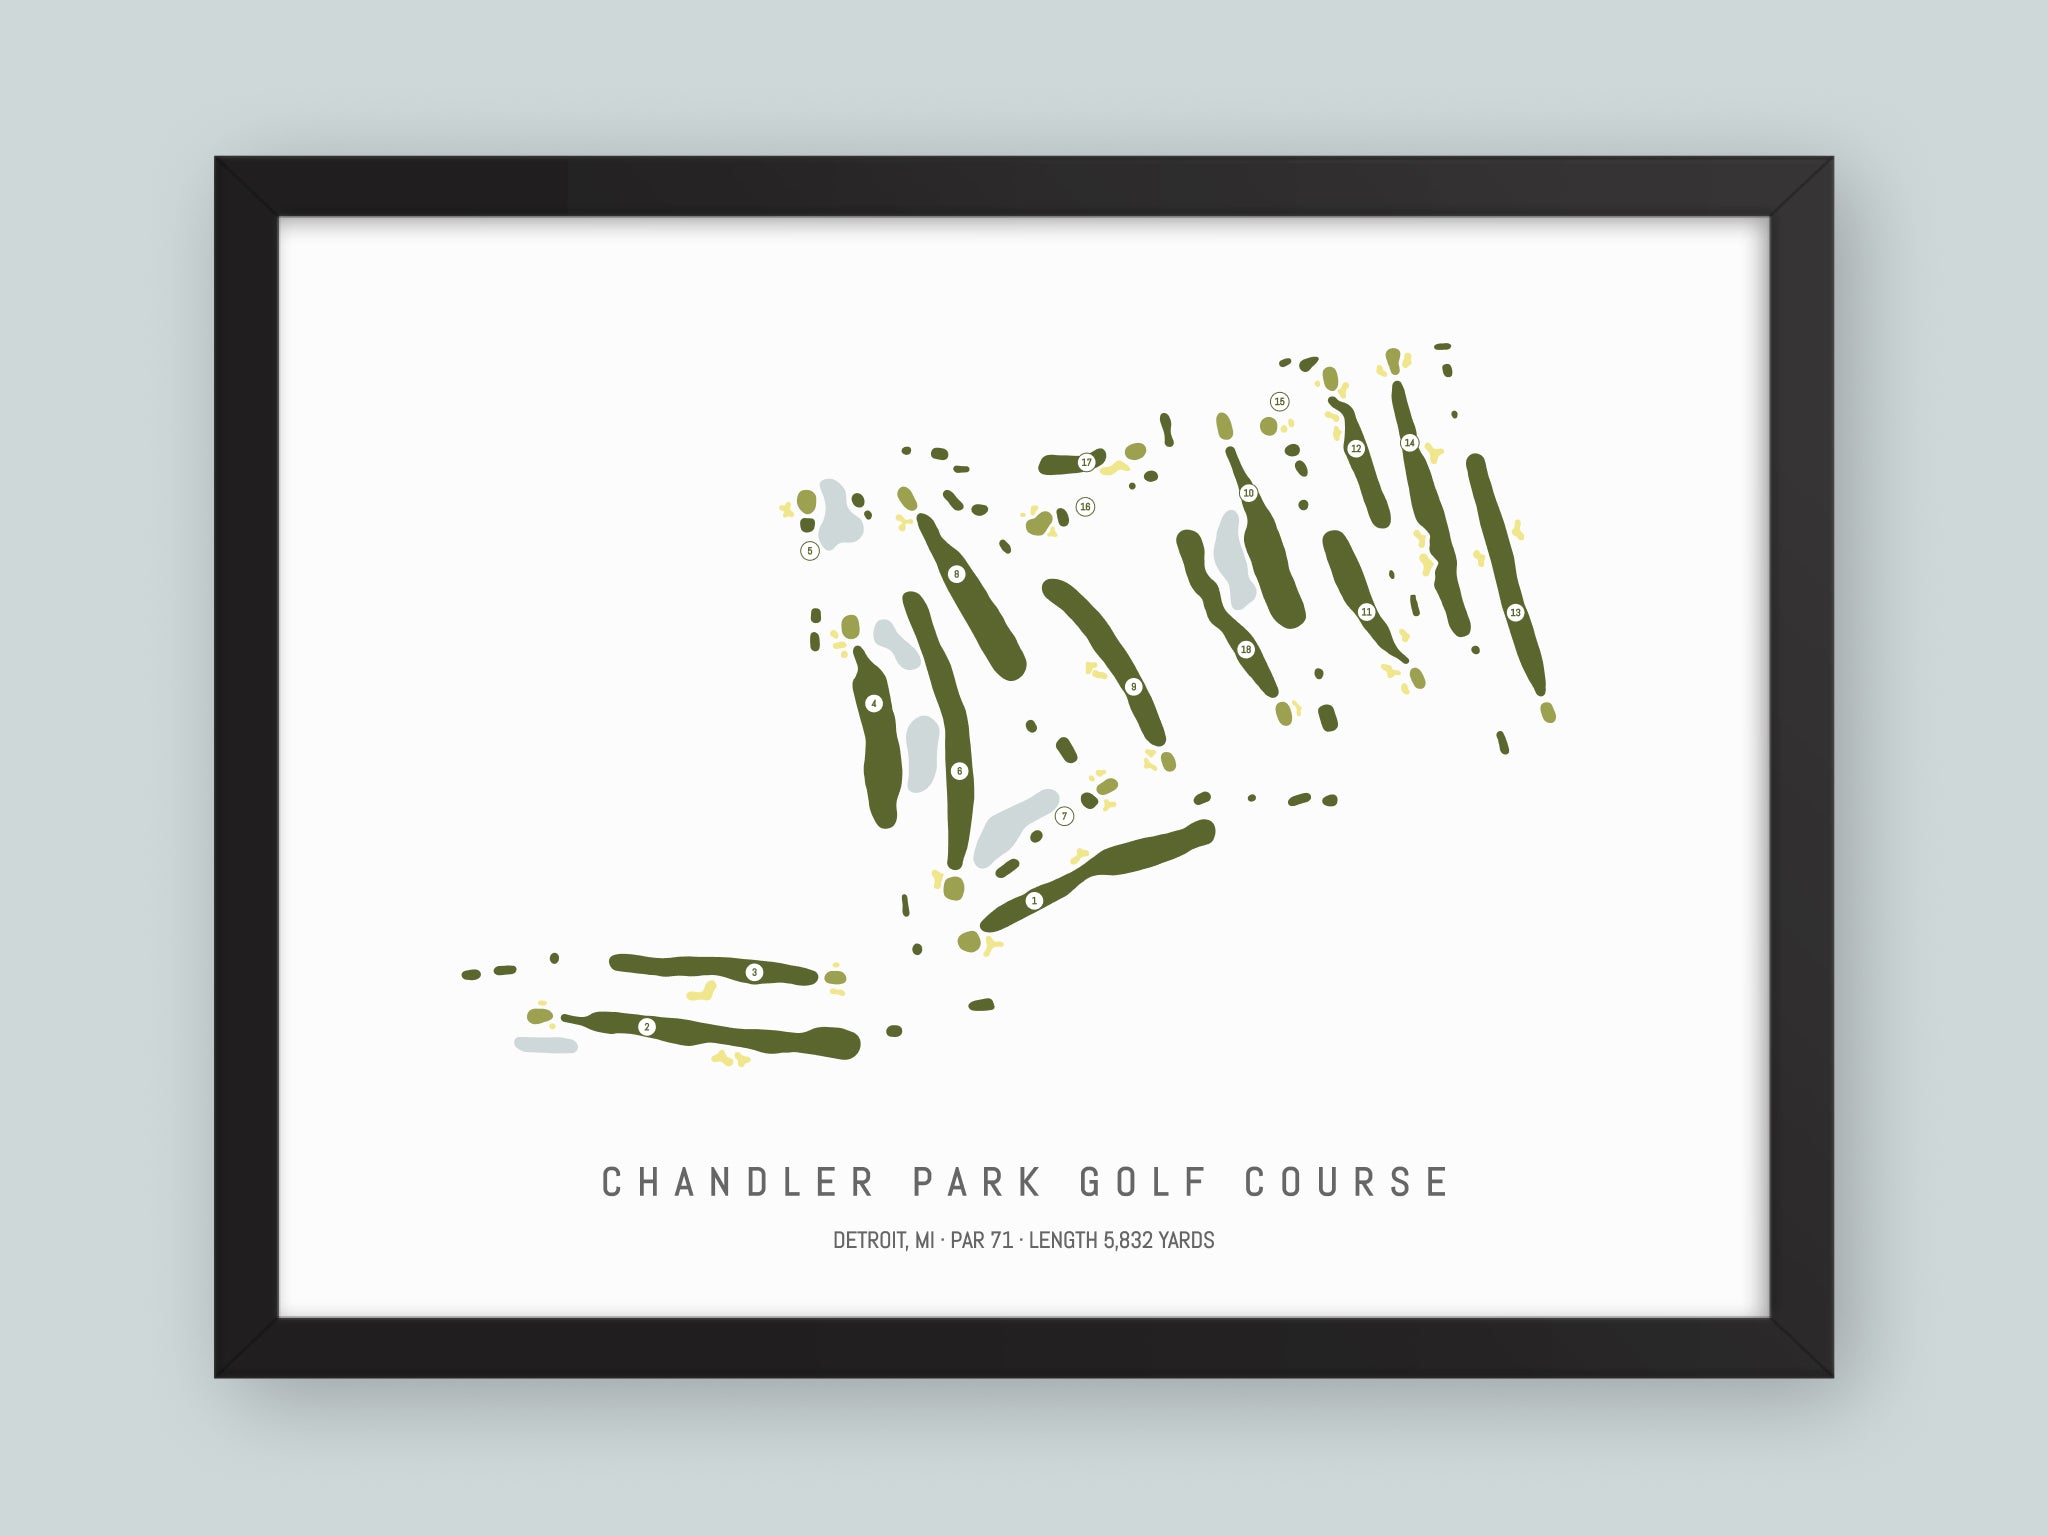 Chandler-Park-Golf-Course-MI--Black-Frame-24x18-With-Hole-Numbers